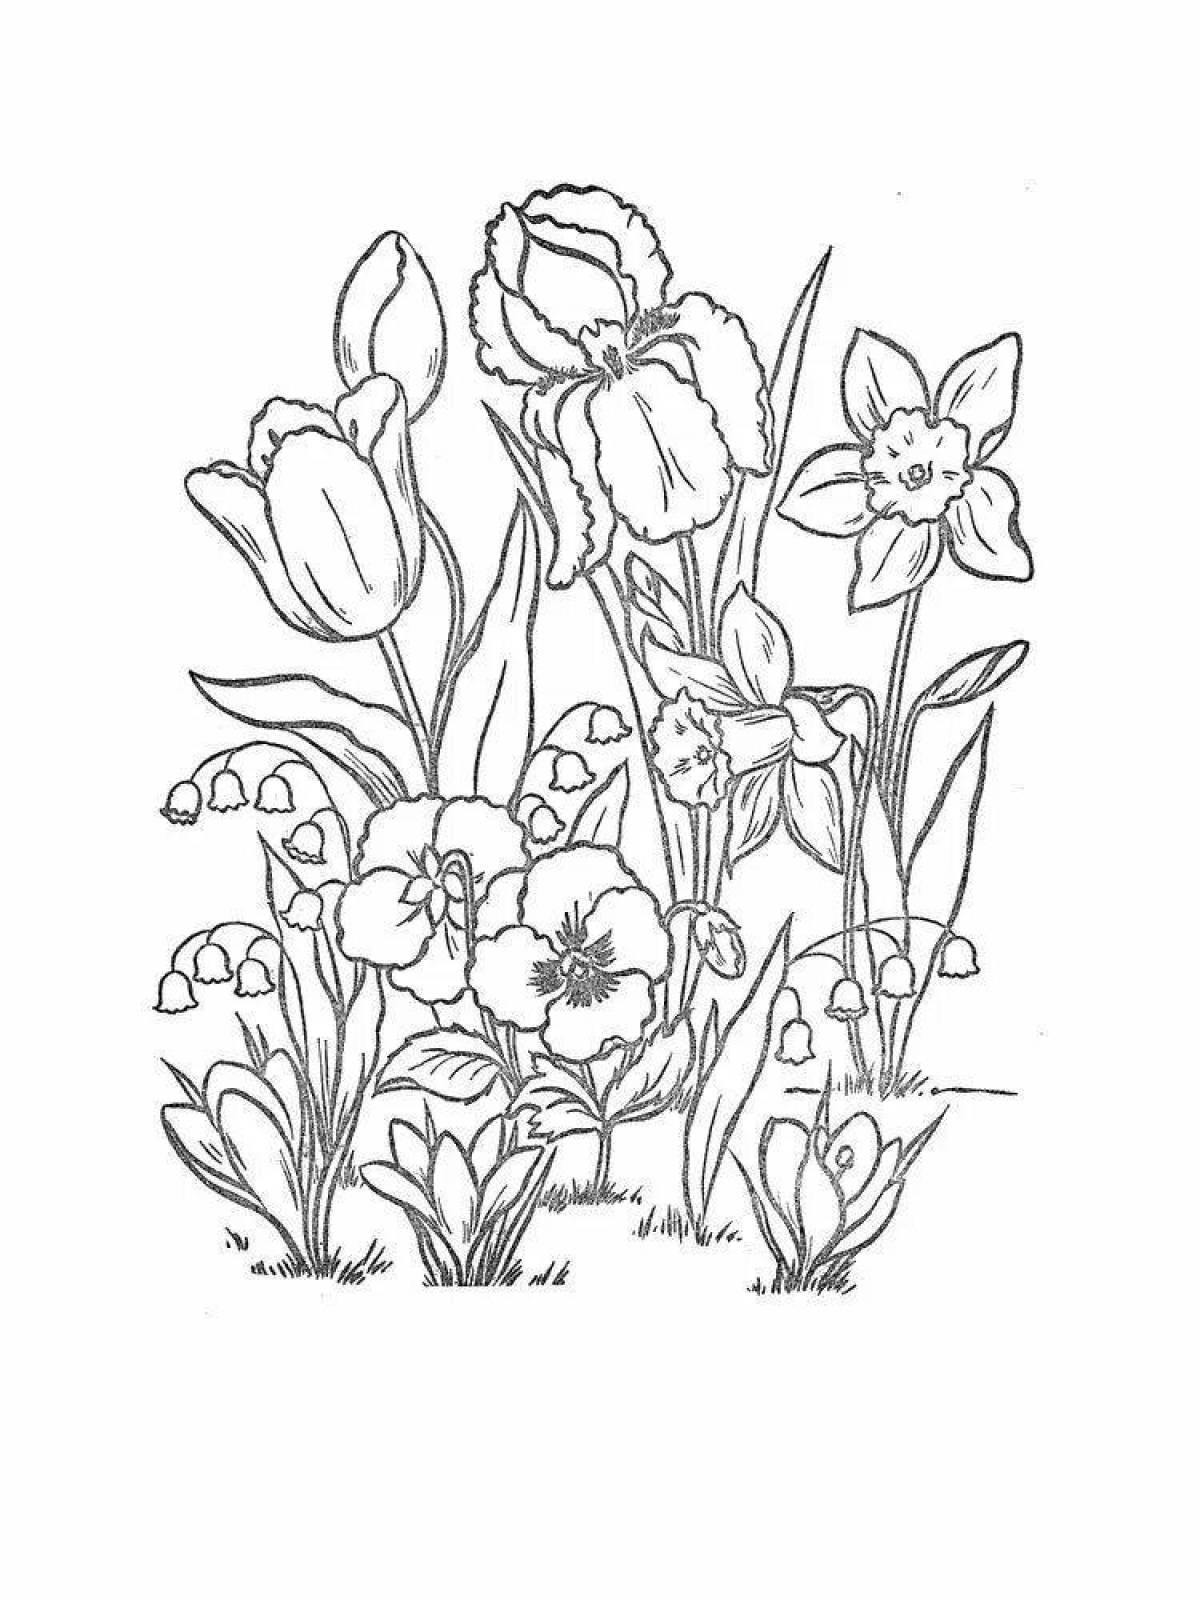 Coloring page dazzling spring flowers